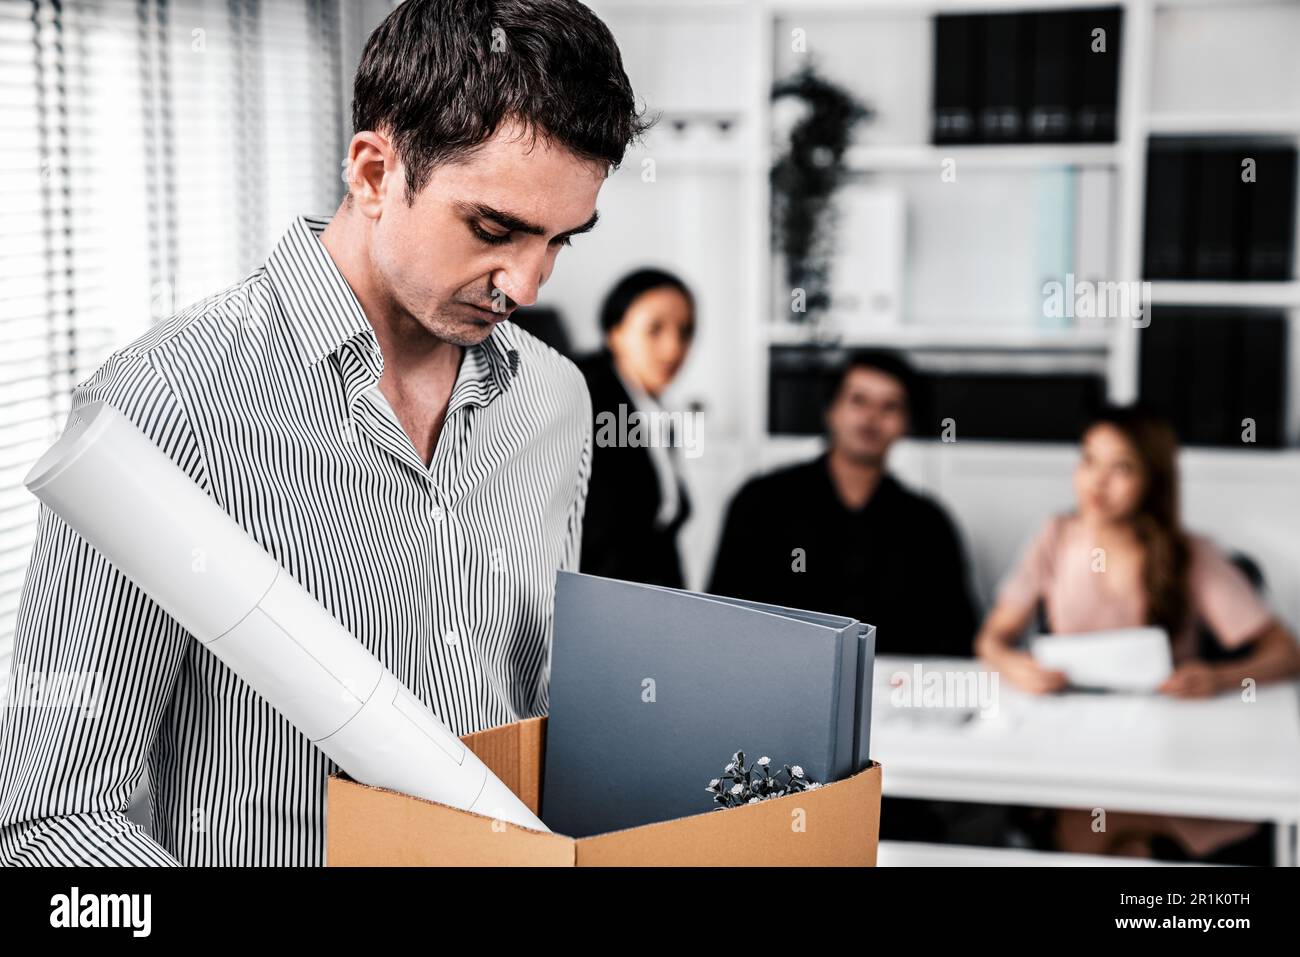 Handwriting text writing Dismissal From Work. Concept meaning Terminated  from Employment for reason Get fired Vertical Zigzag Lines Alternate Color  in Stock Photo - Alamy